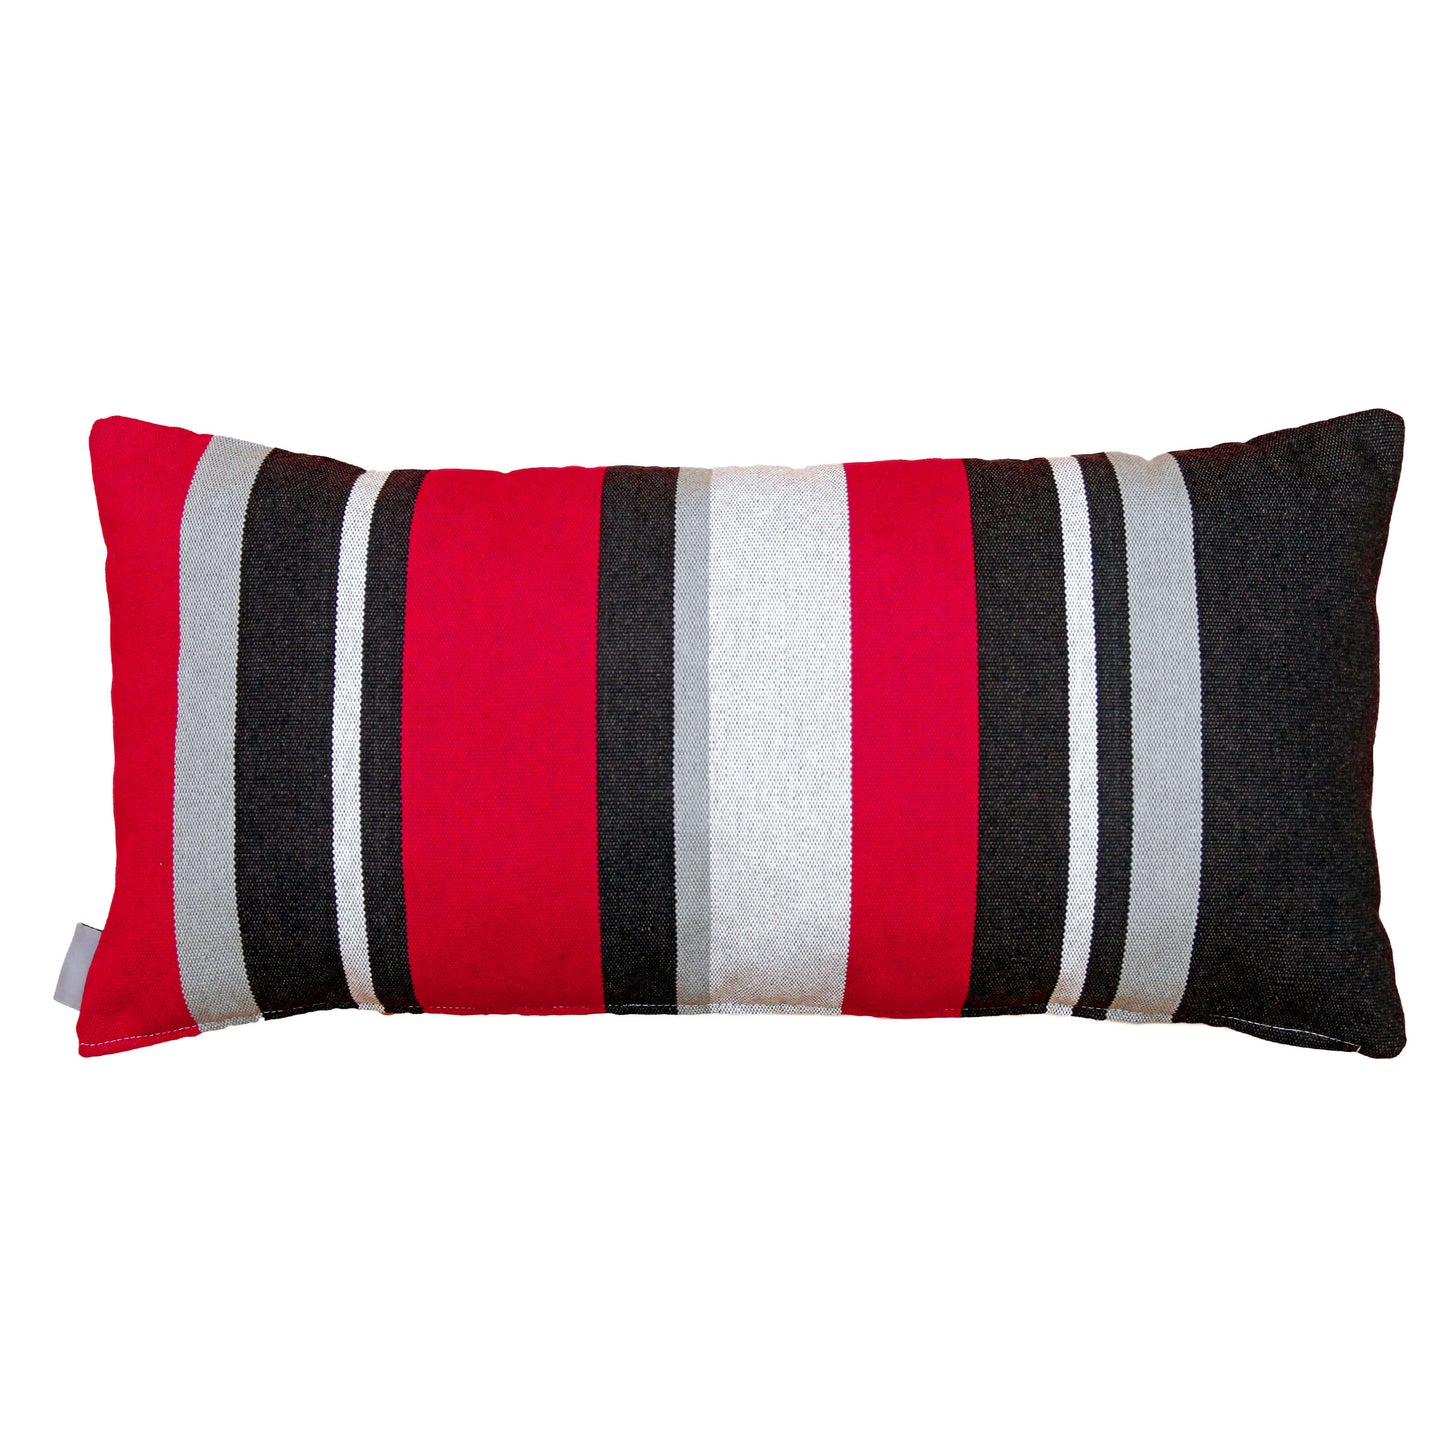 Ohio State cushion pillow scarlet and gray